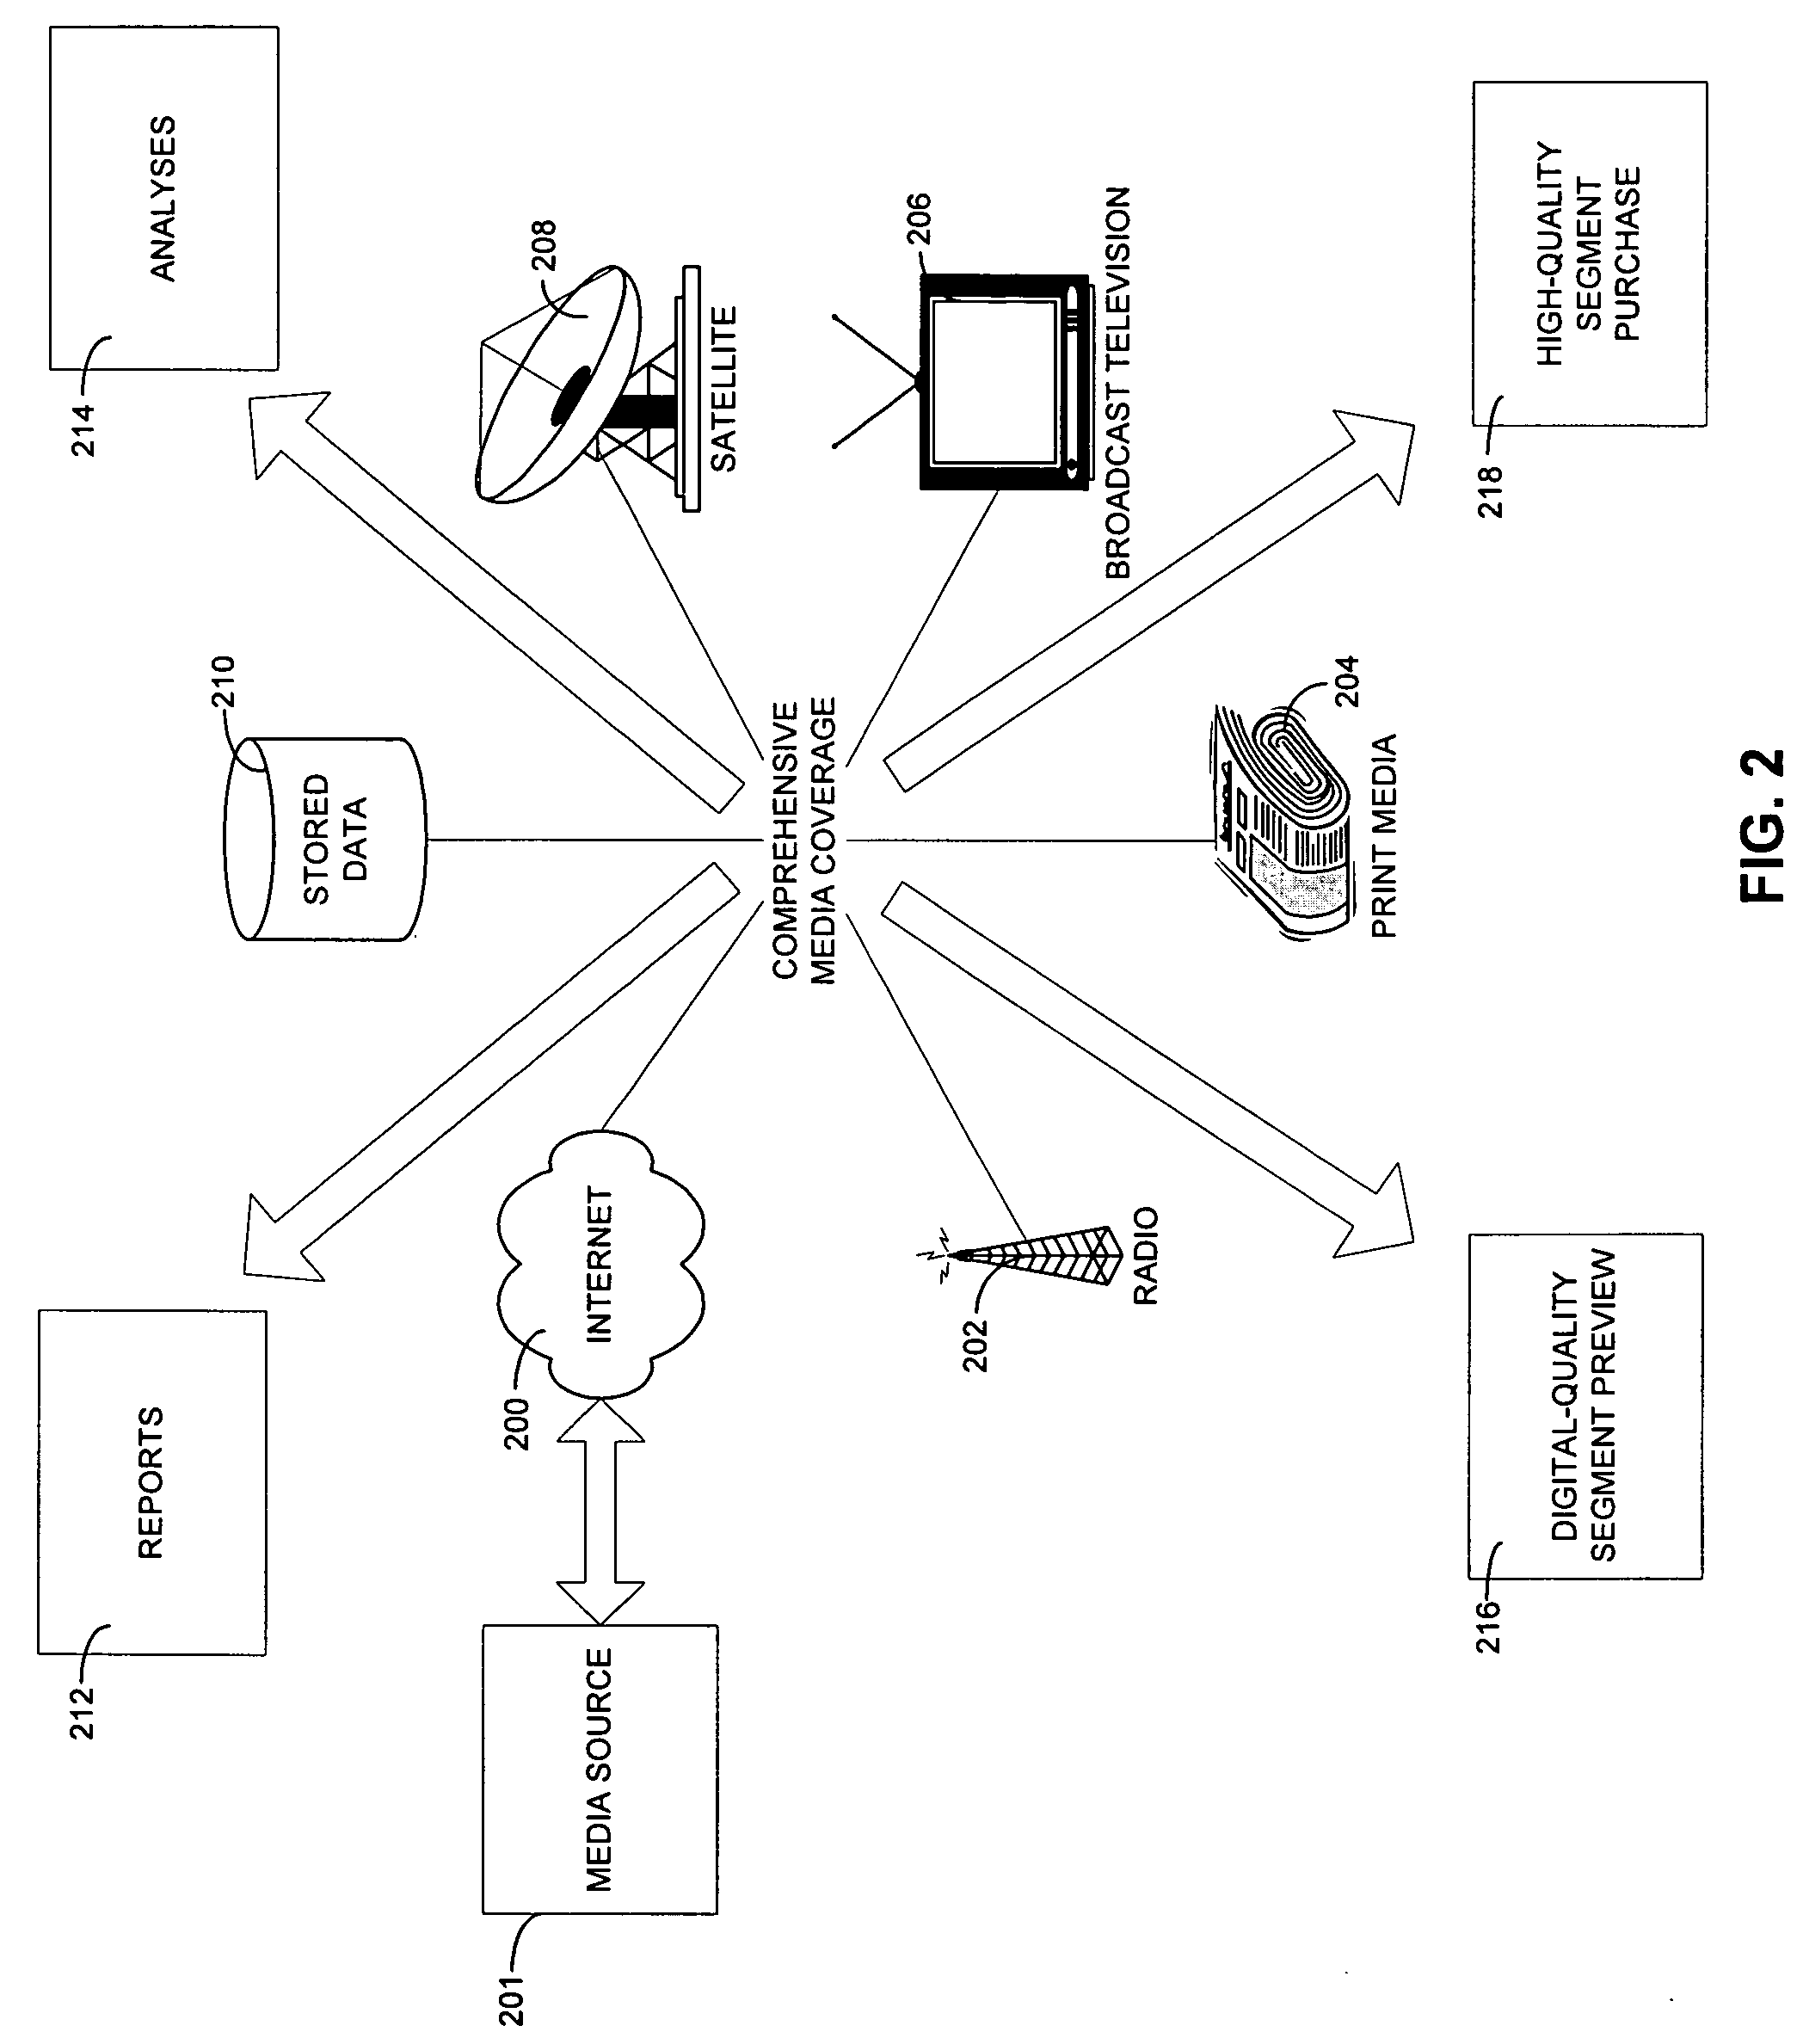 Method for integrated media monitoring, purchase, and display